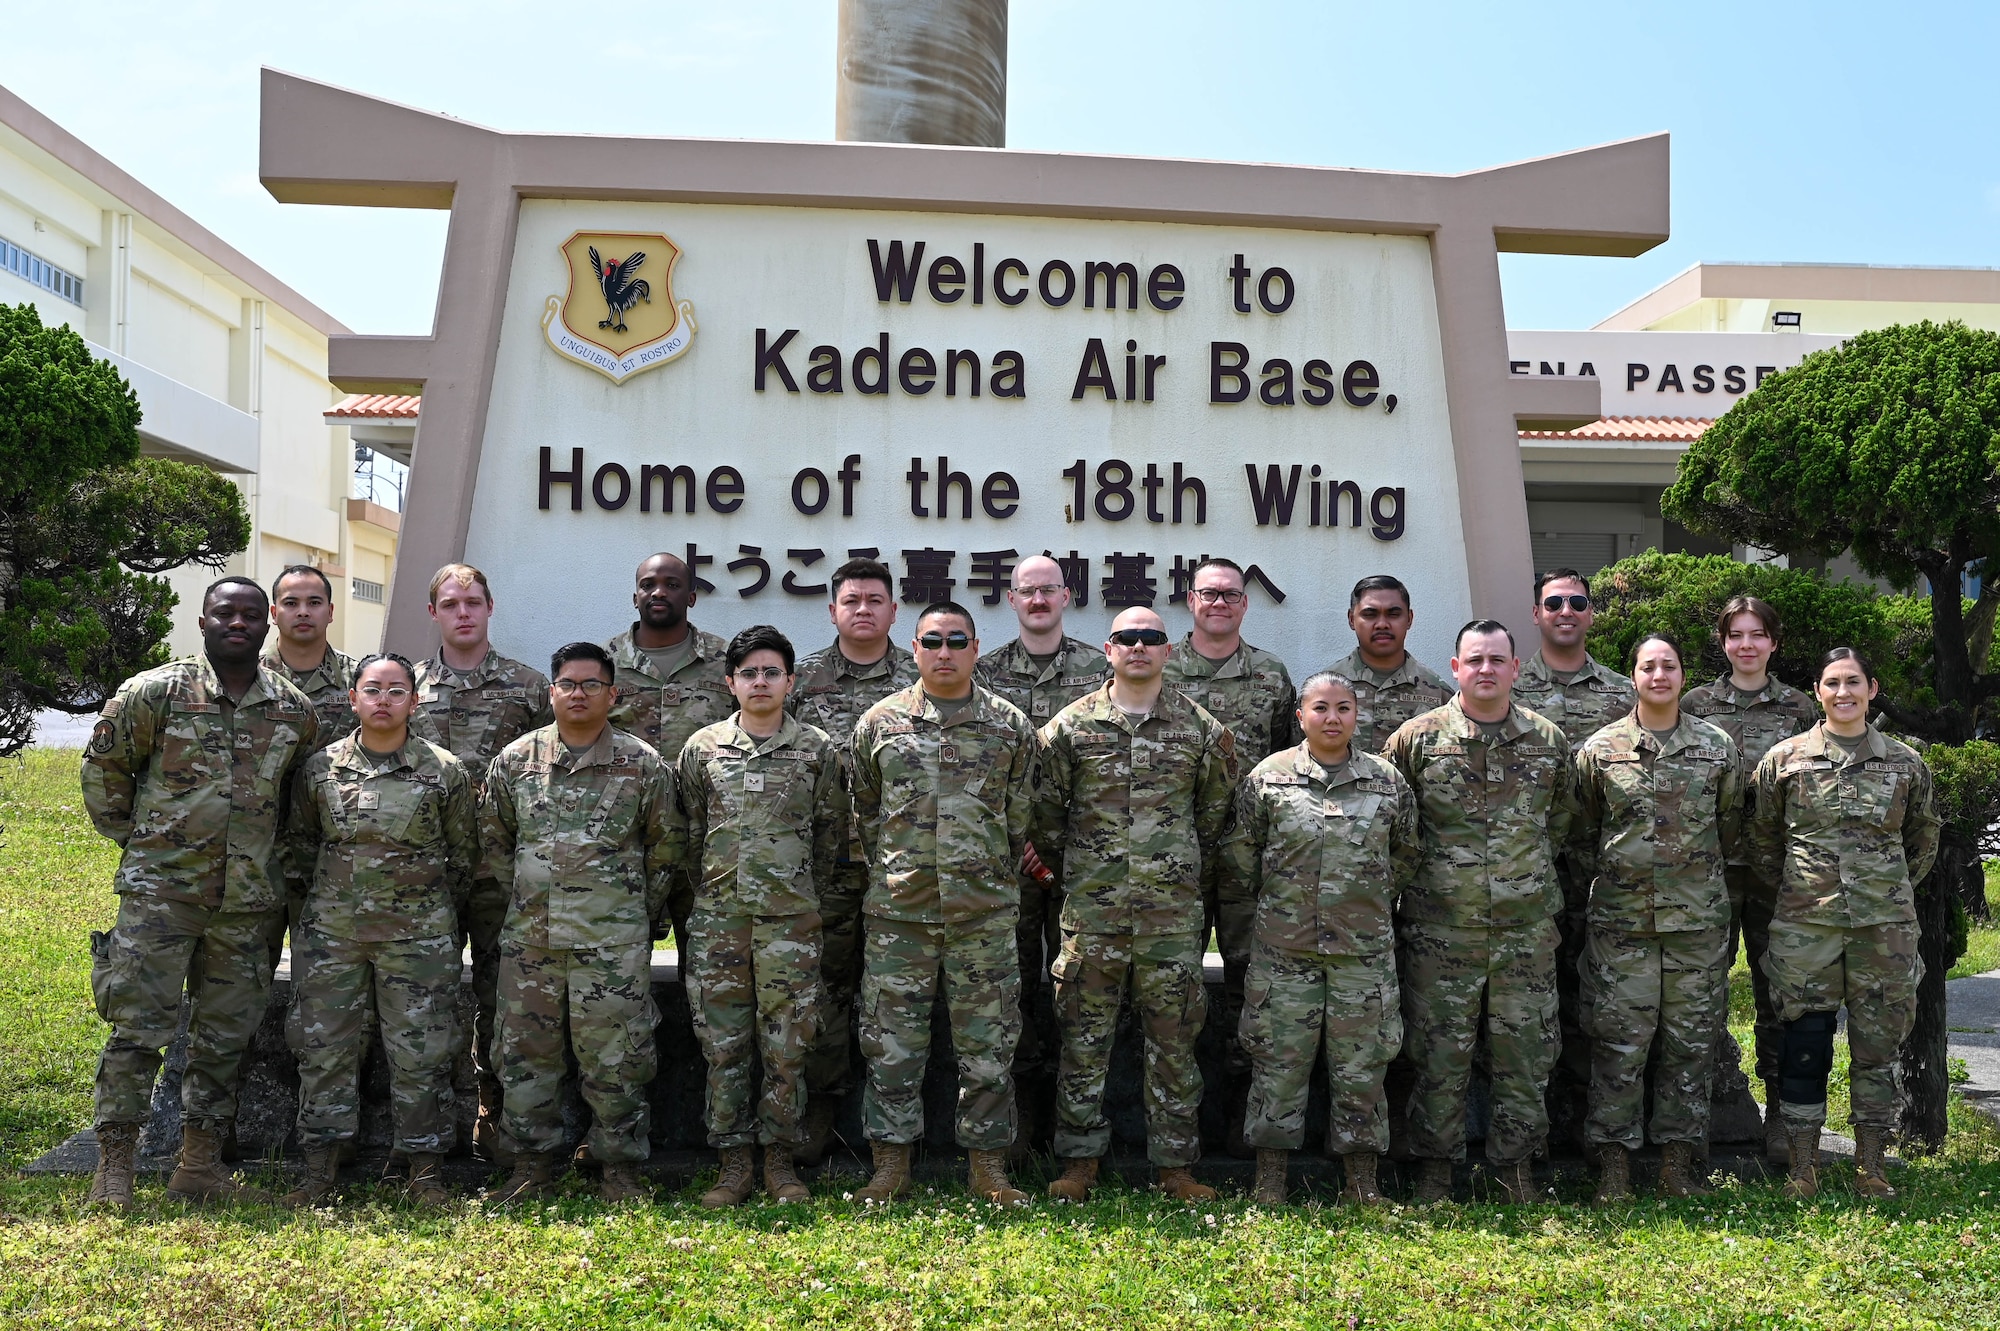 A group photo of airmen in front of the Welcome to Kadena Air Base sign.